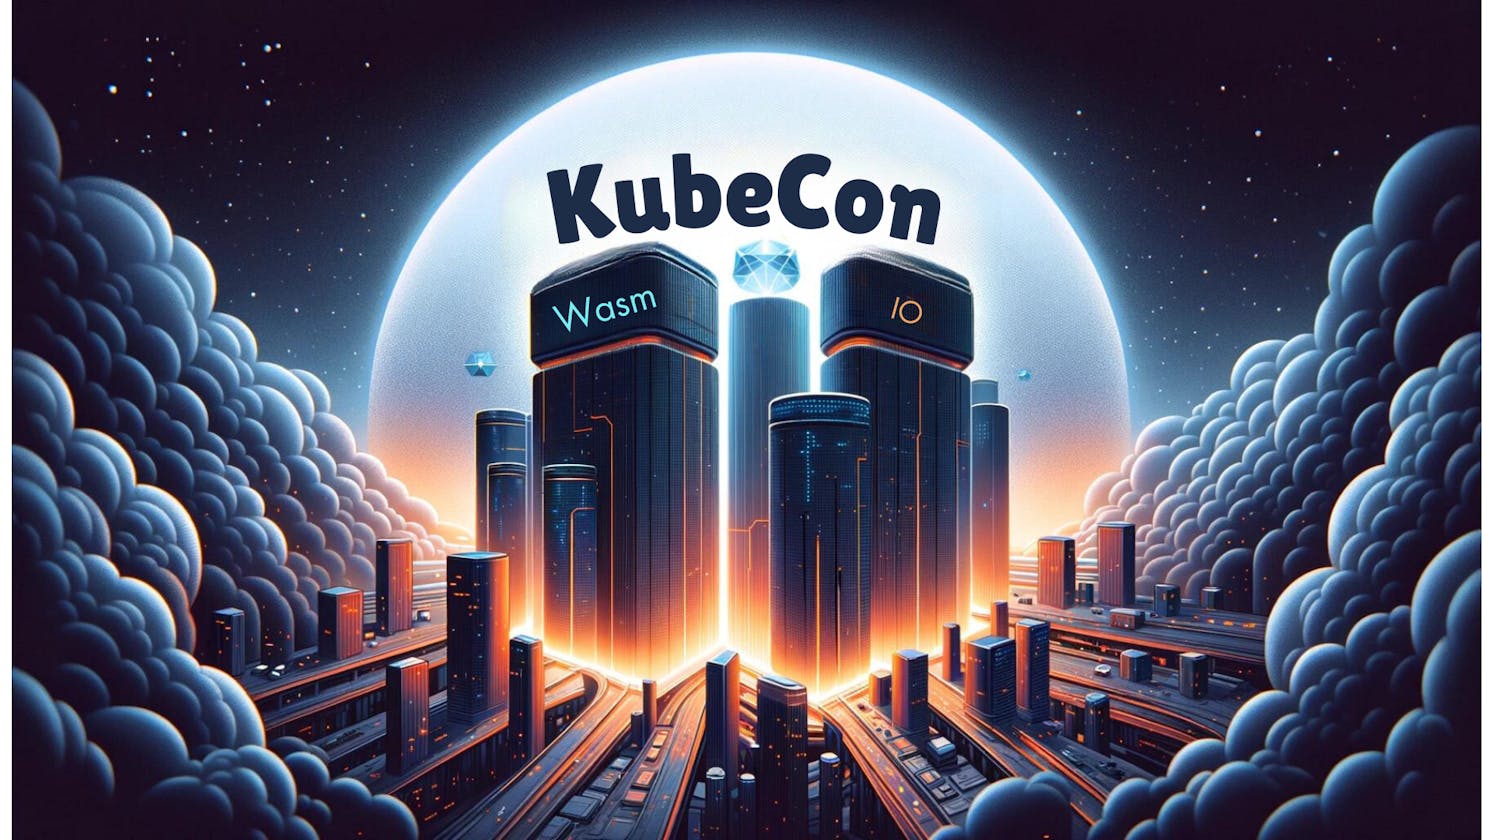 KubeCon + CloudNativeCon, Rejekts and Wasm I/O Wrap-Up: A Leap into the Future with WebAssembly, AI, and Sustainable Cloud Practices